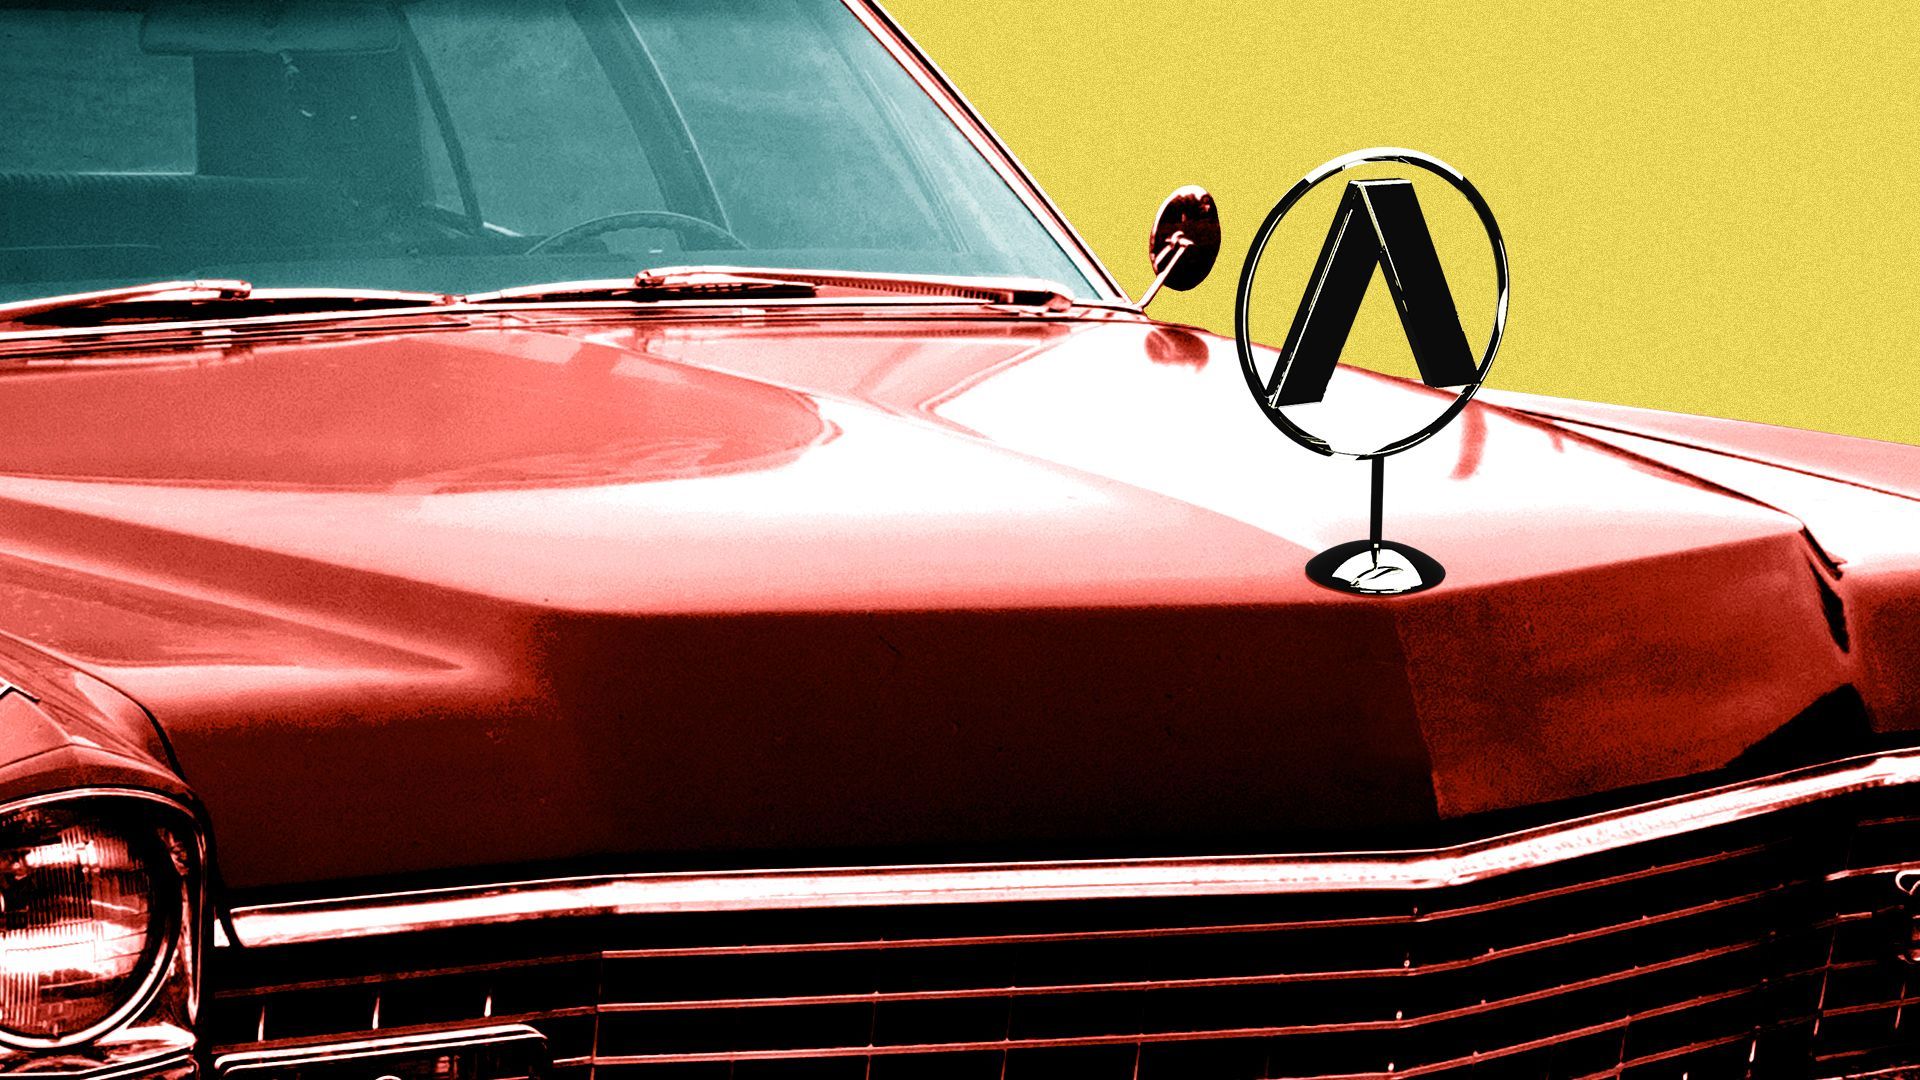 Illustration of a vintage car with an Axios logo for a hood ornament.